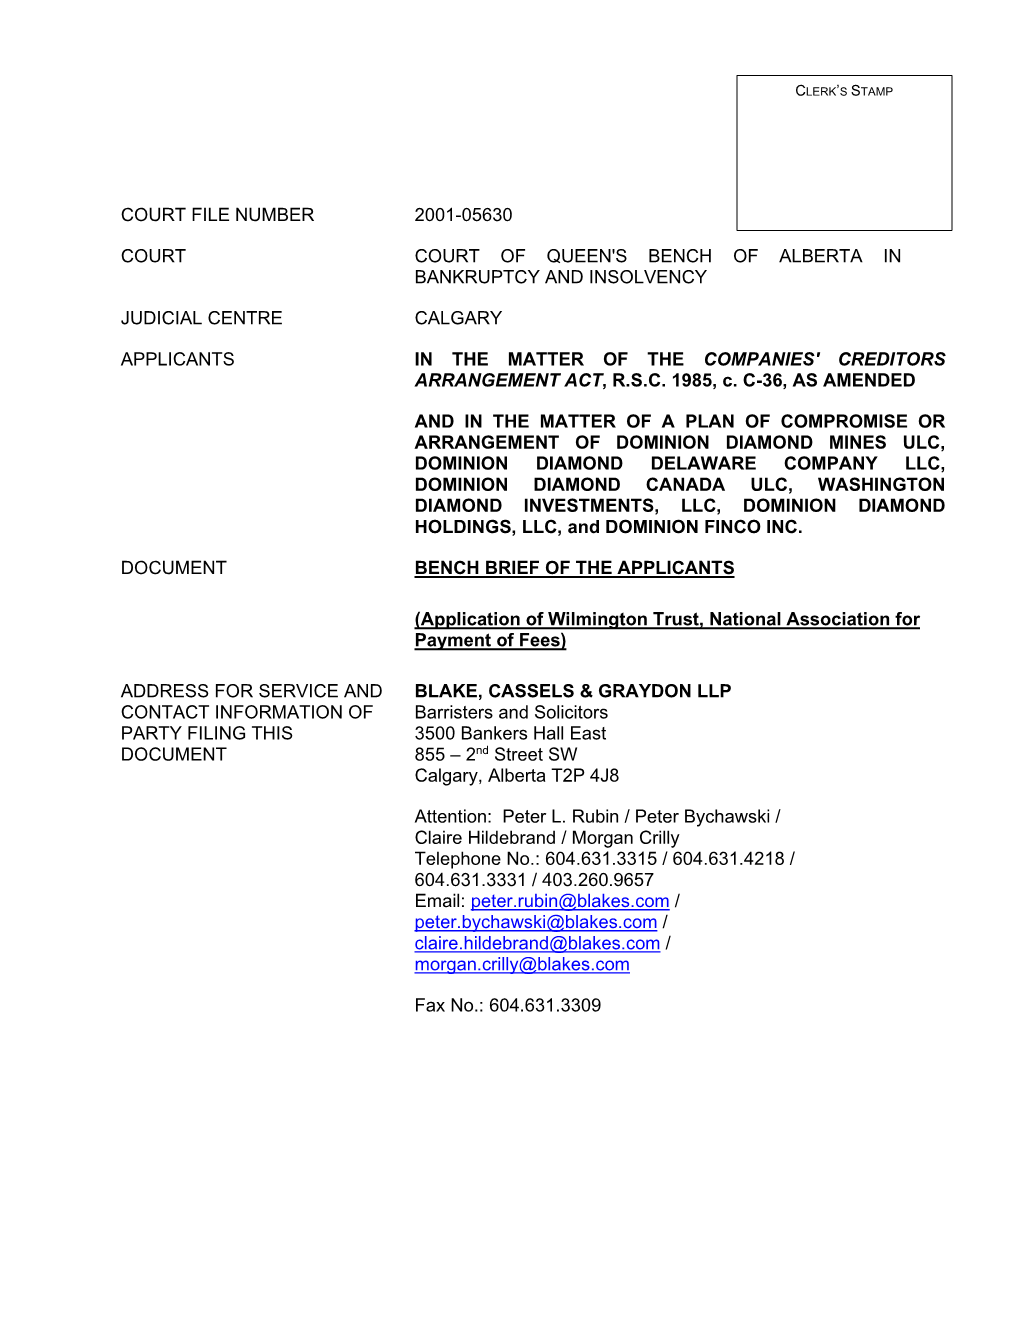 Bench Brief of the Applicants 6182020.Pdf